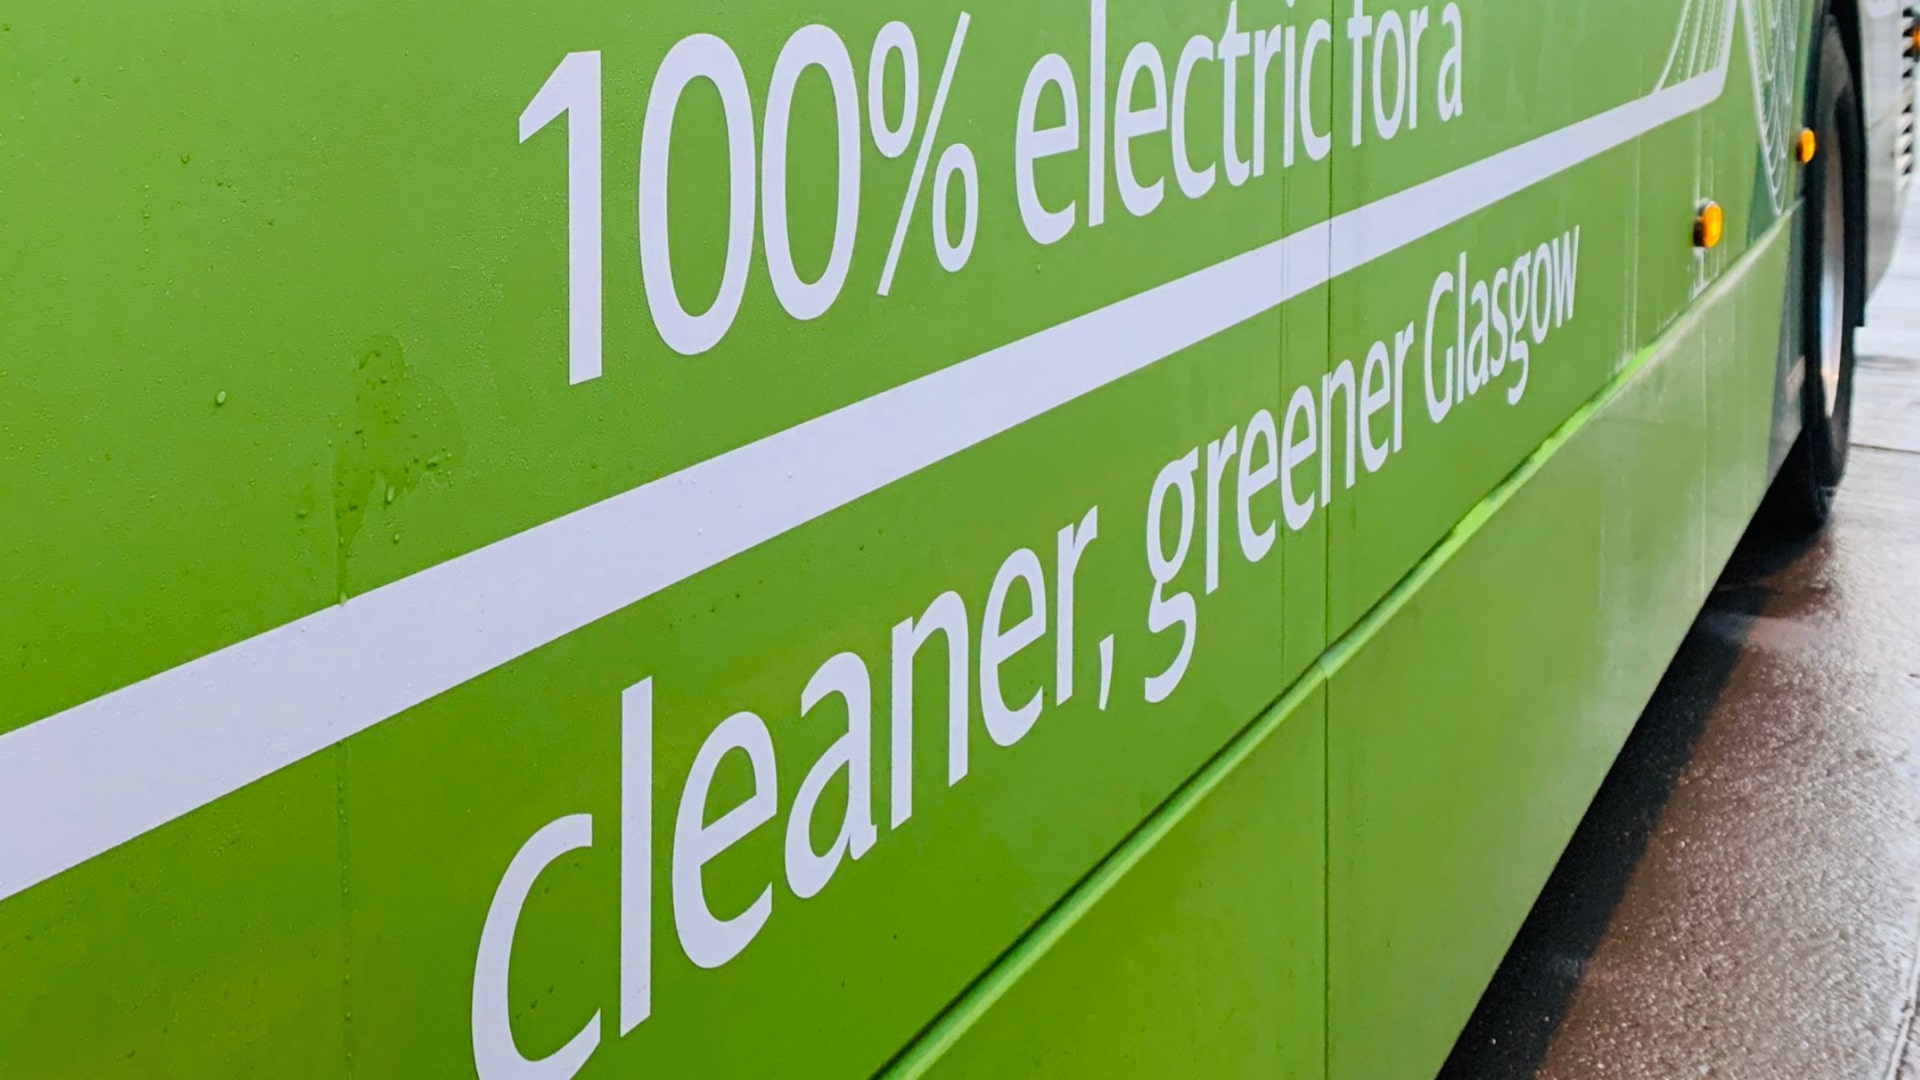 Electric buses come to Glasgow as city aims for zero' emissions